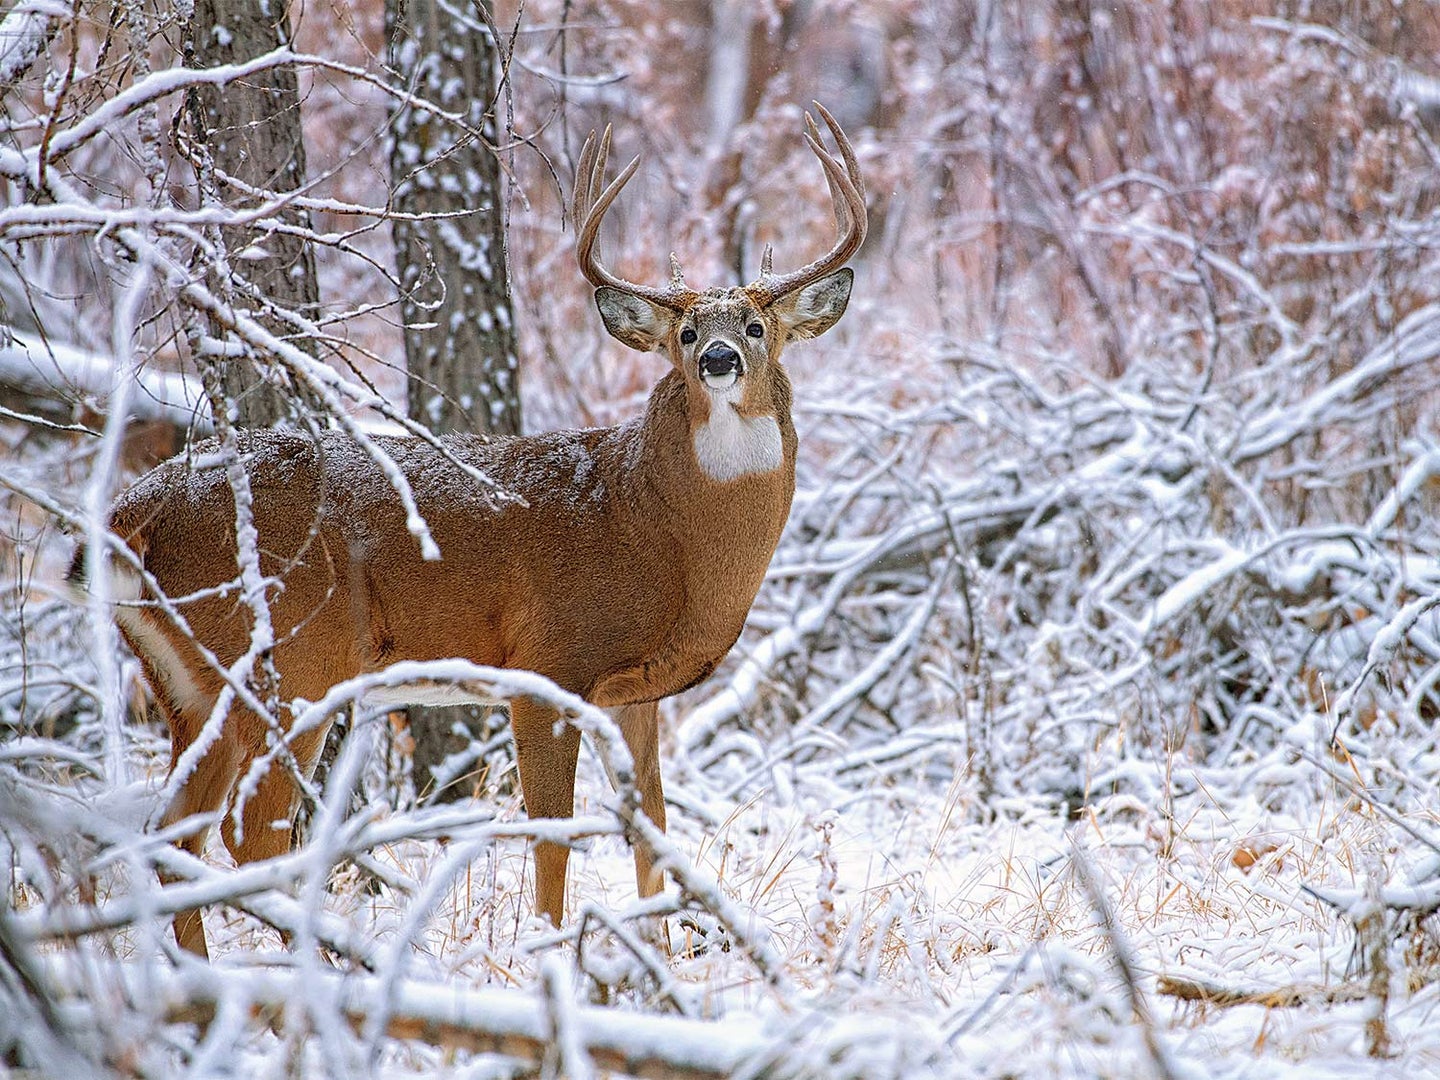 A whitetail buck walking through a snow-covered forest.